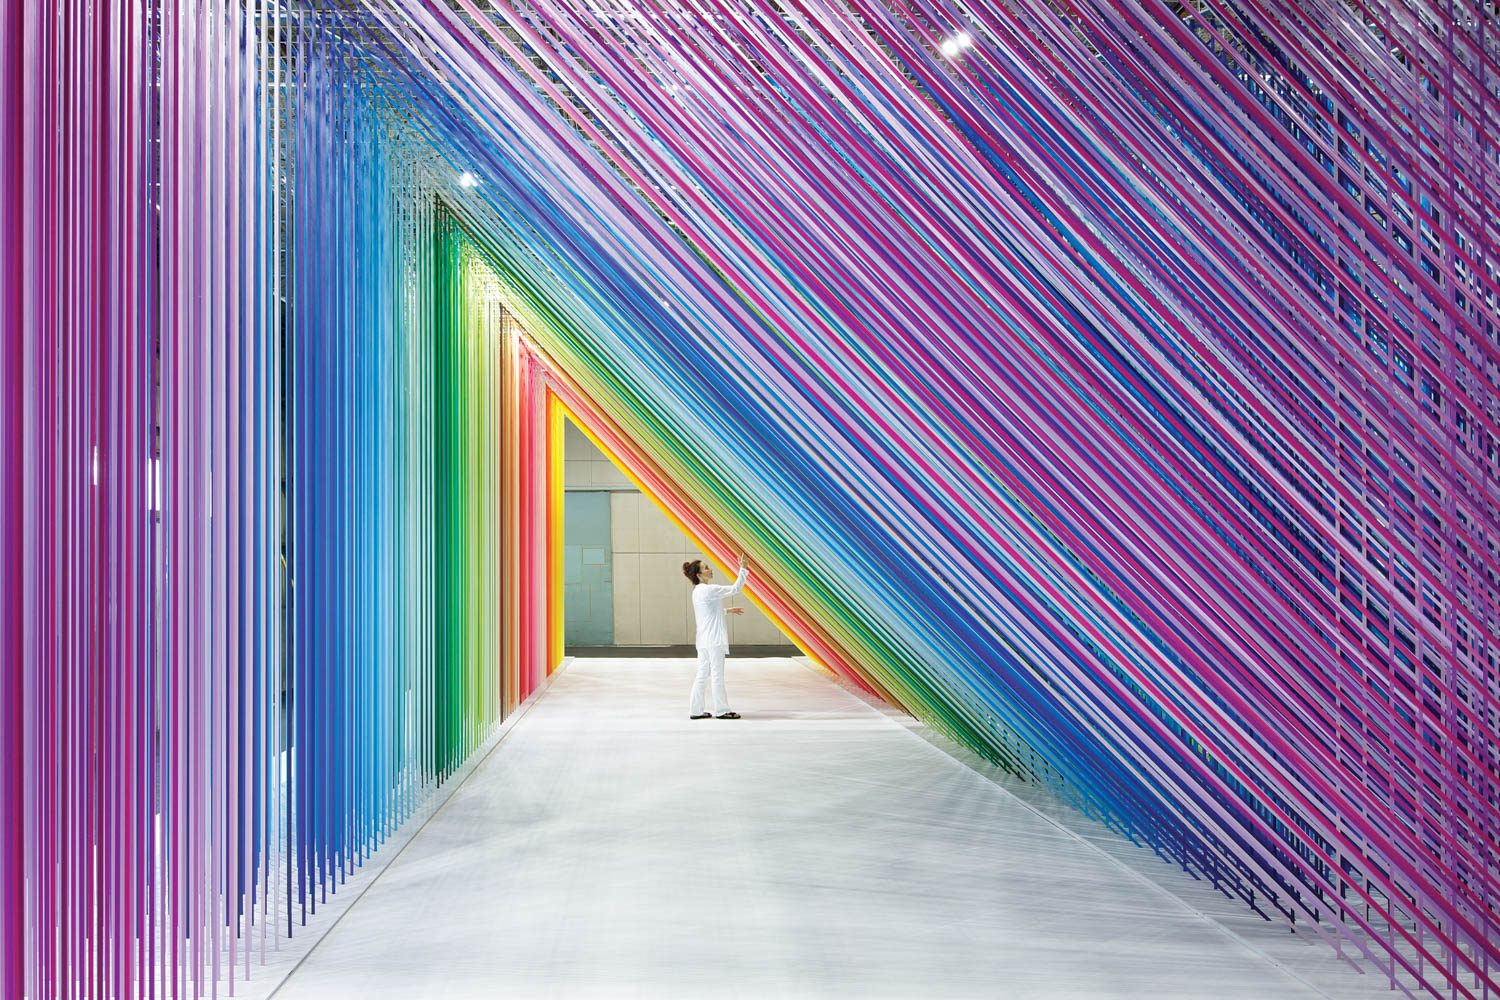 tunnel takes the shape of a right scalene triangle in Emmanuelle Moureaux Architecture + Design’s 100 Colors no.35 for Japanese masking tape brand MT’s factory in Kurashiki, Japan.